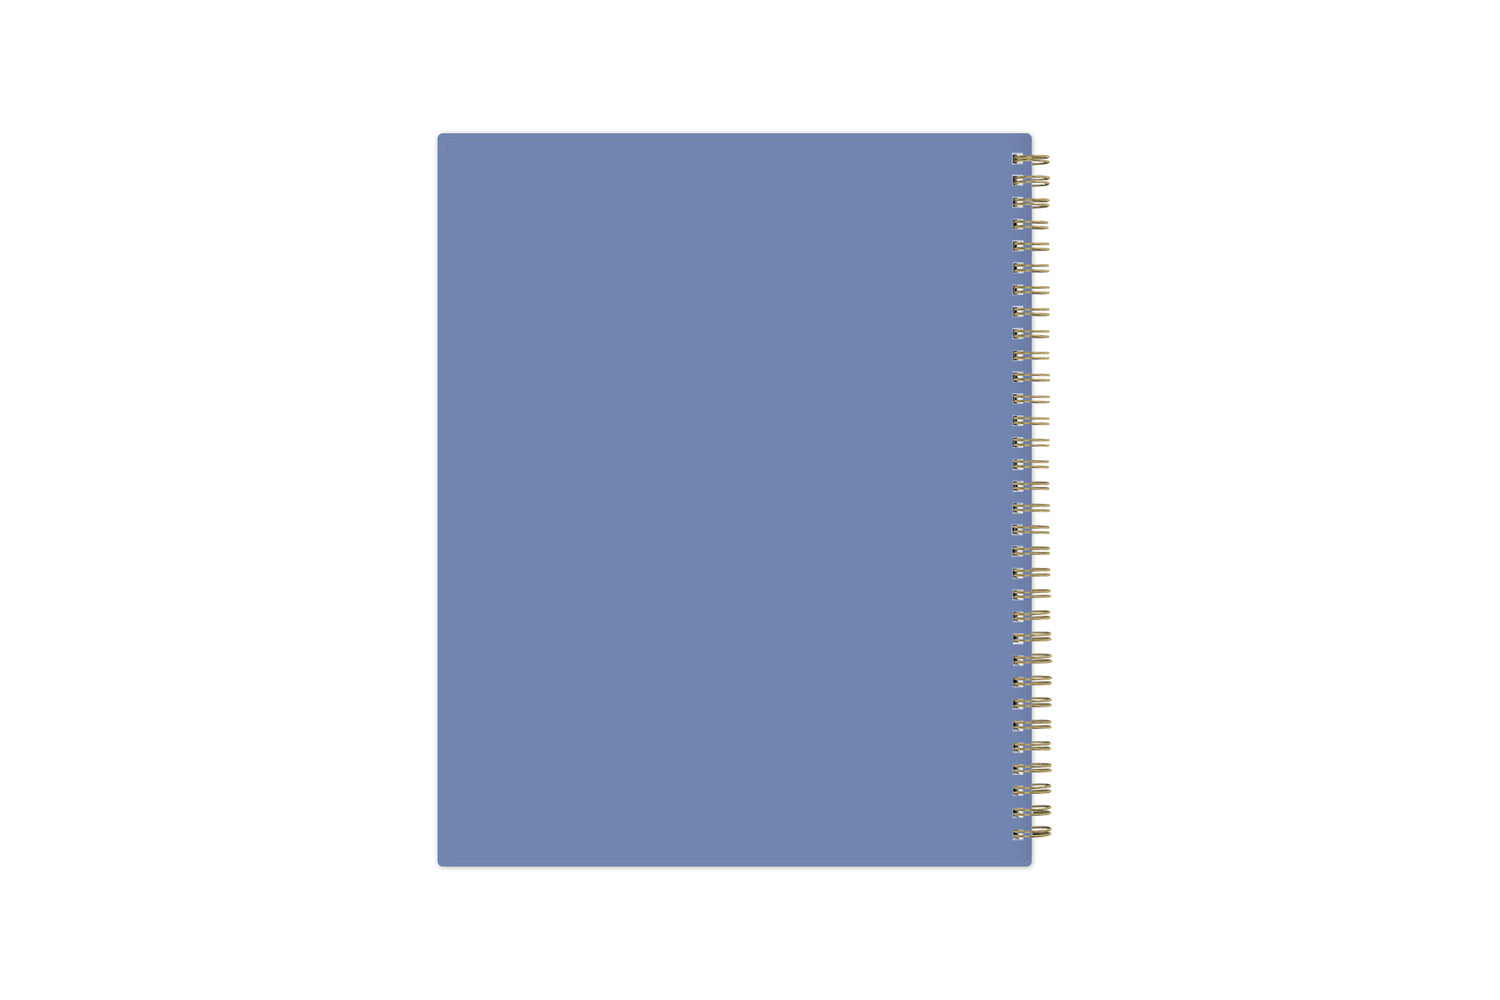 solid light blue background on 8.5x11 planner size